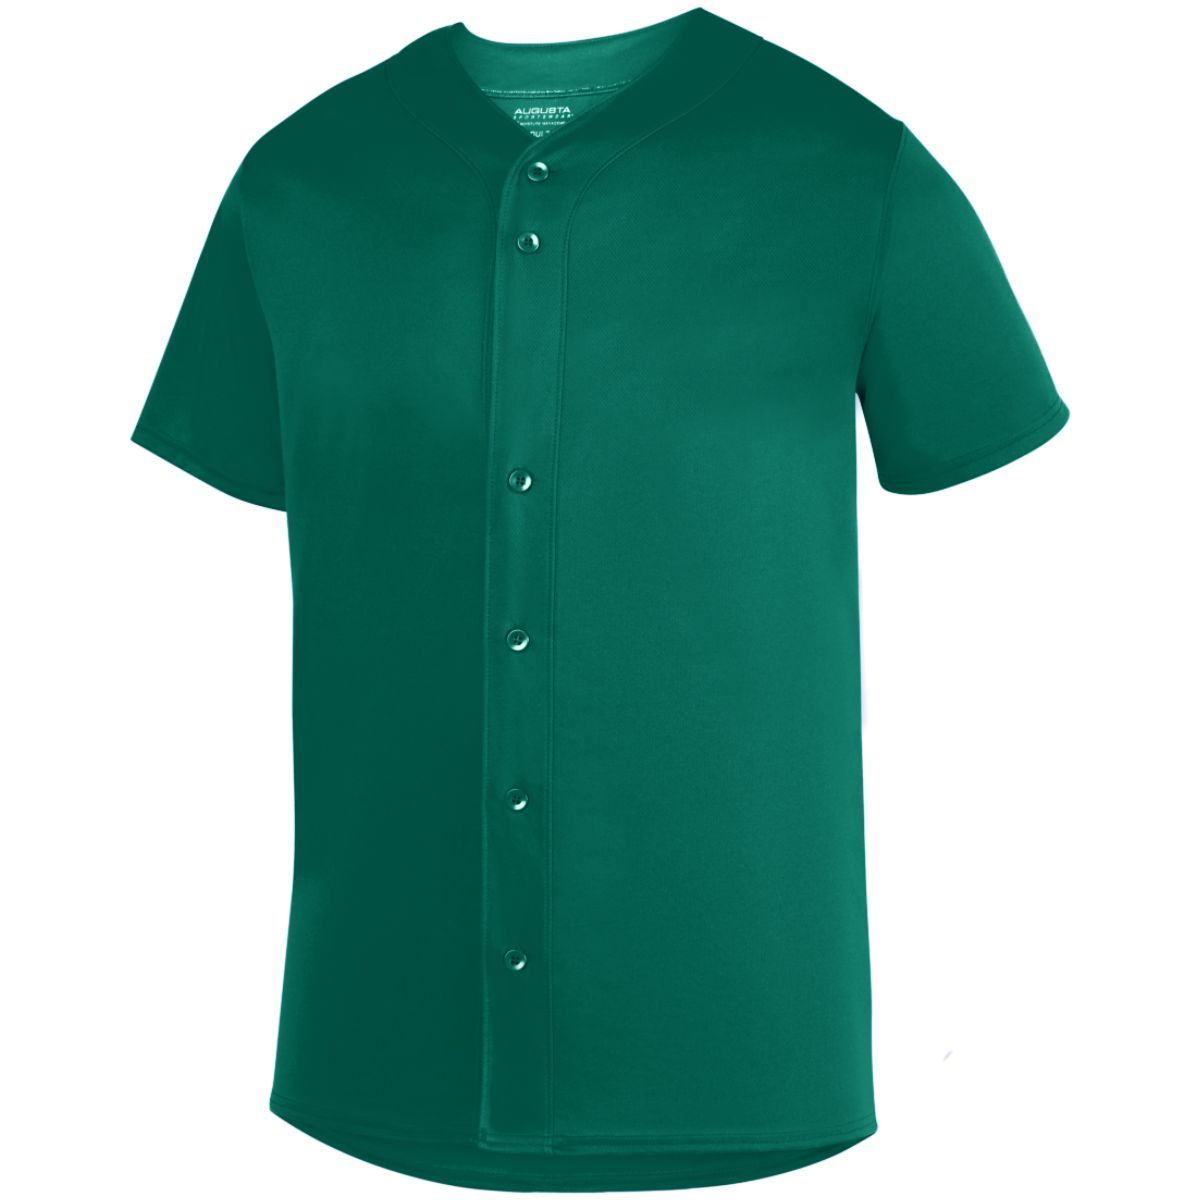 Augusta Sportswear Sultan Jersey in Dark Green  -Part of the Adult, Adult-Jersey, Augusta-Products, Baseball, Shirts, All-Sports, All-Sports-1 product lines at KanaleyCreations.com